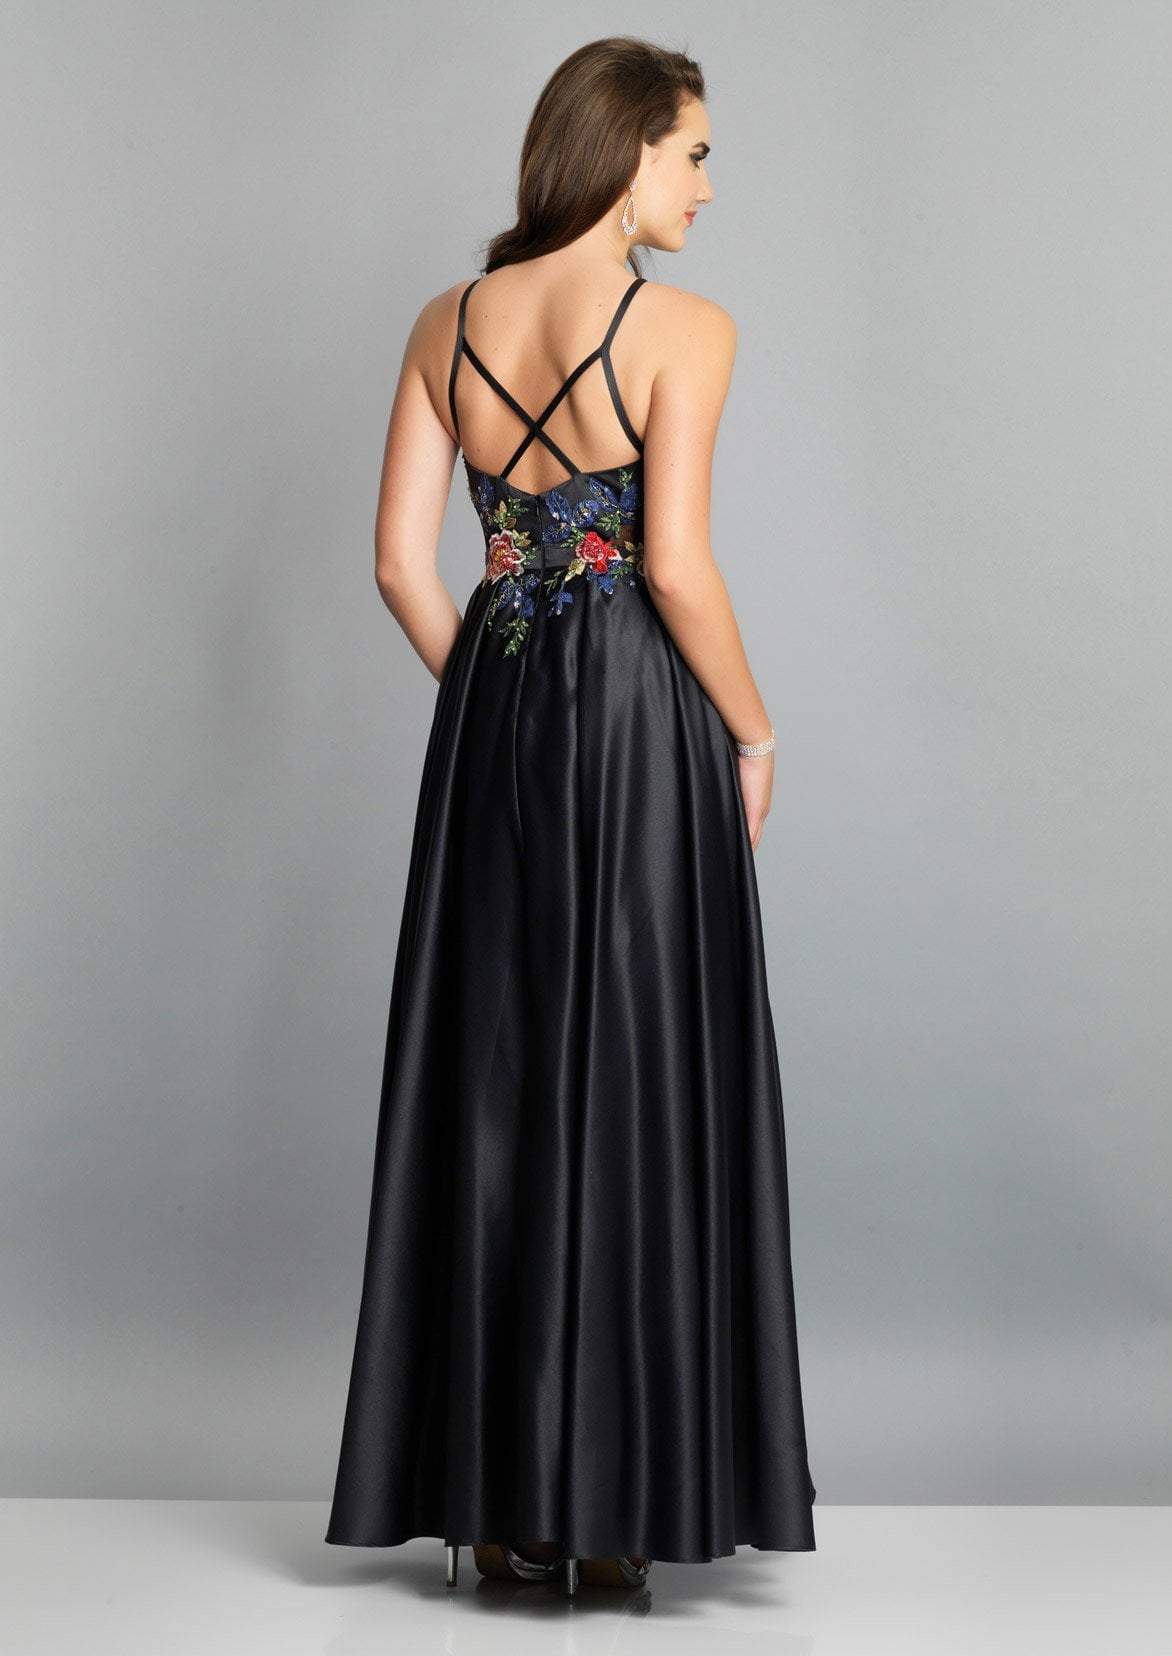 Dave & Johnny - Floral Embroidered Jewel Bodice A-Line Gown A7616  In Black